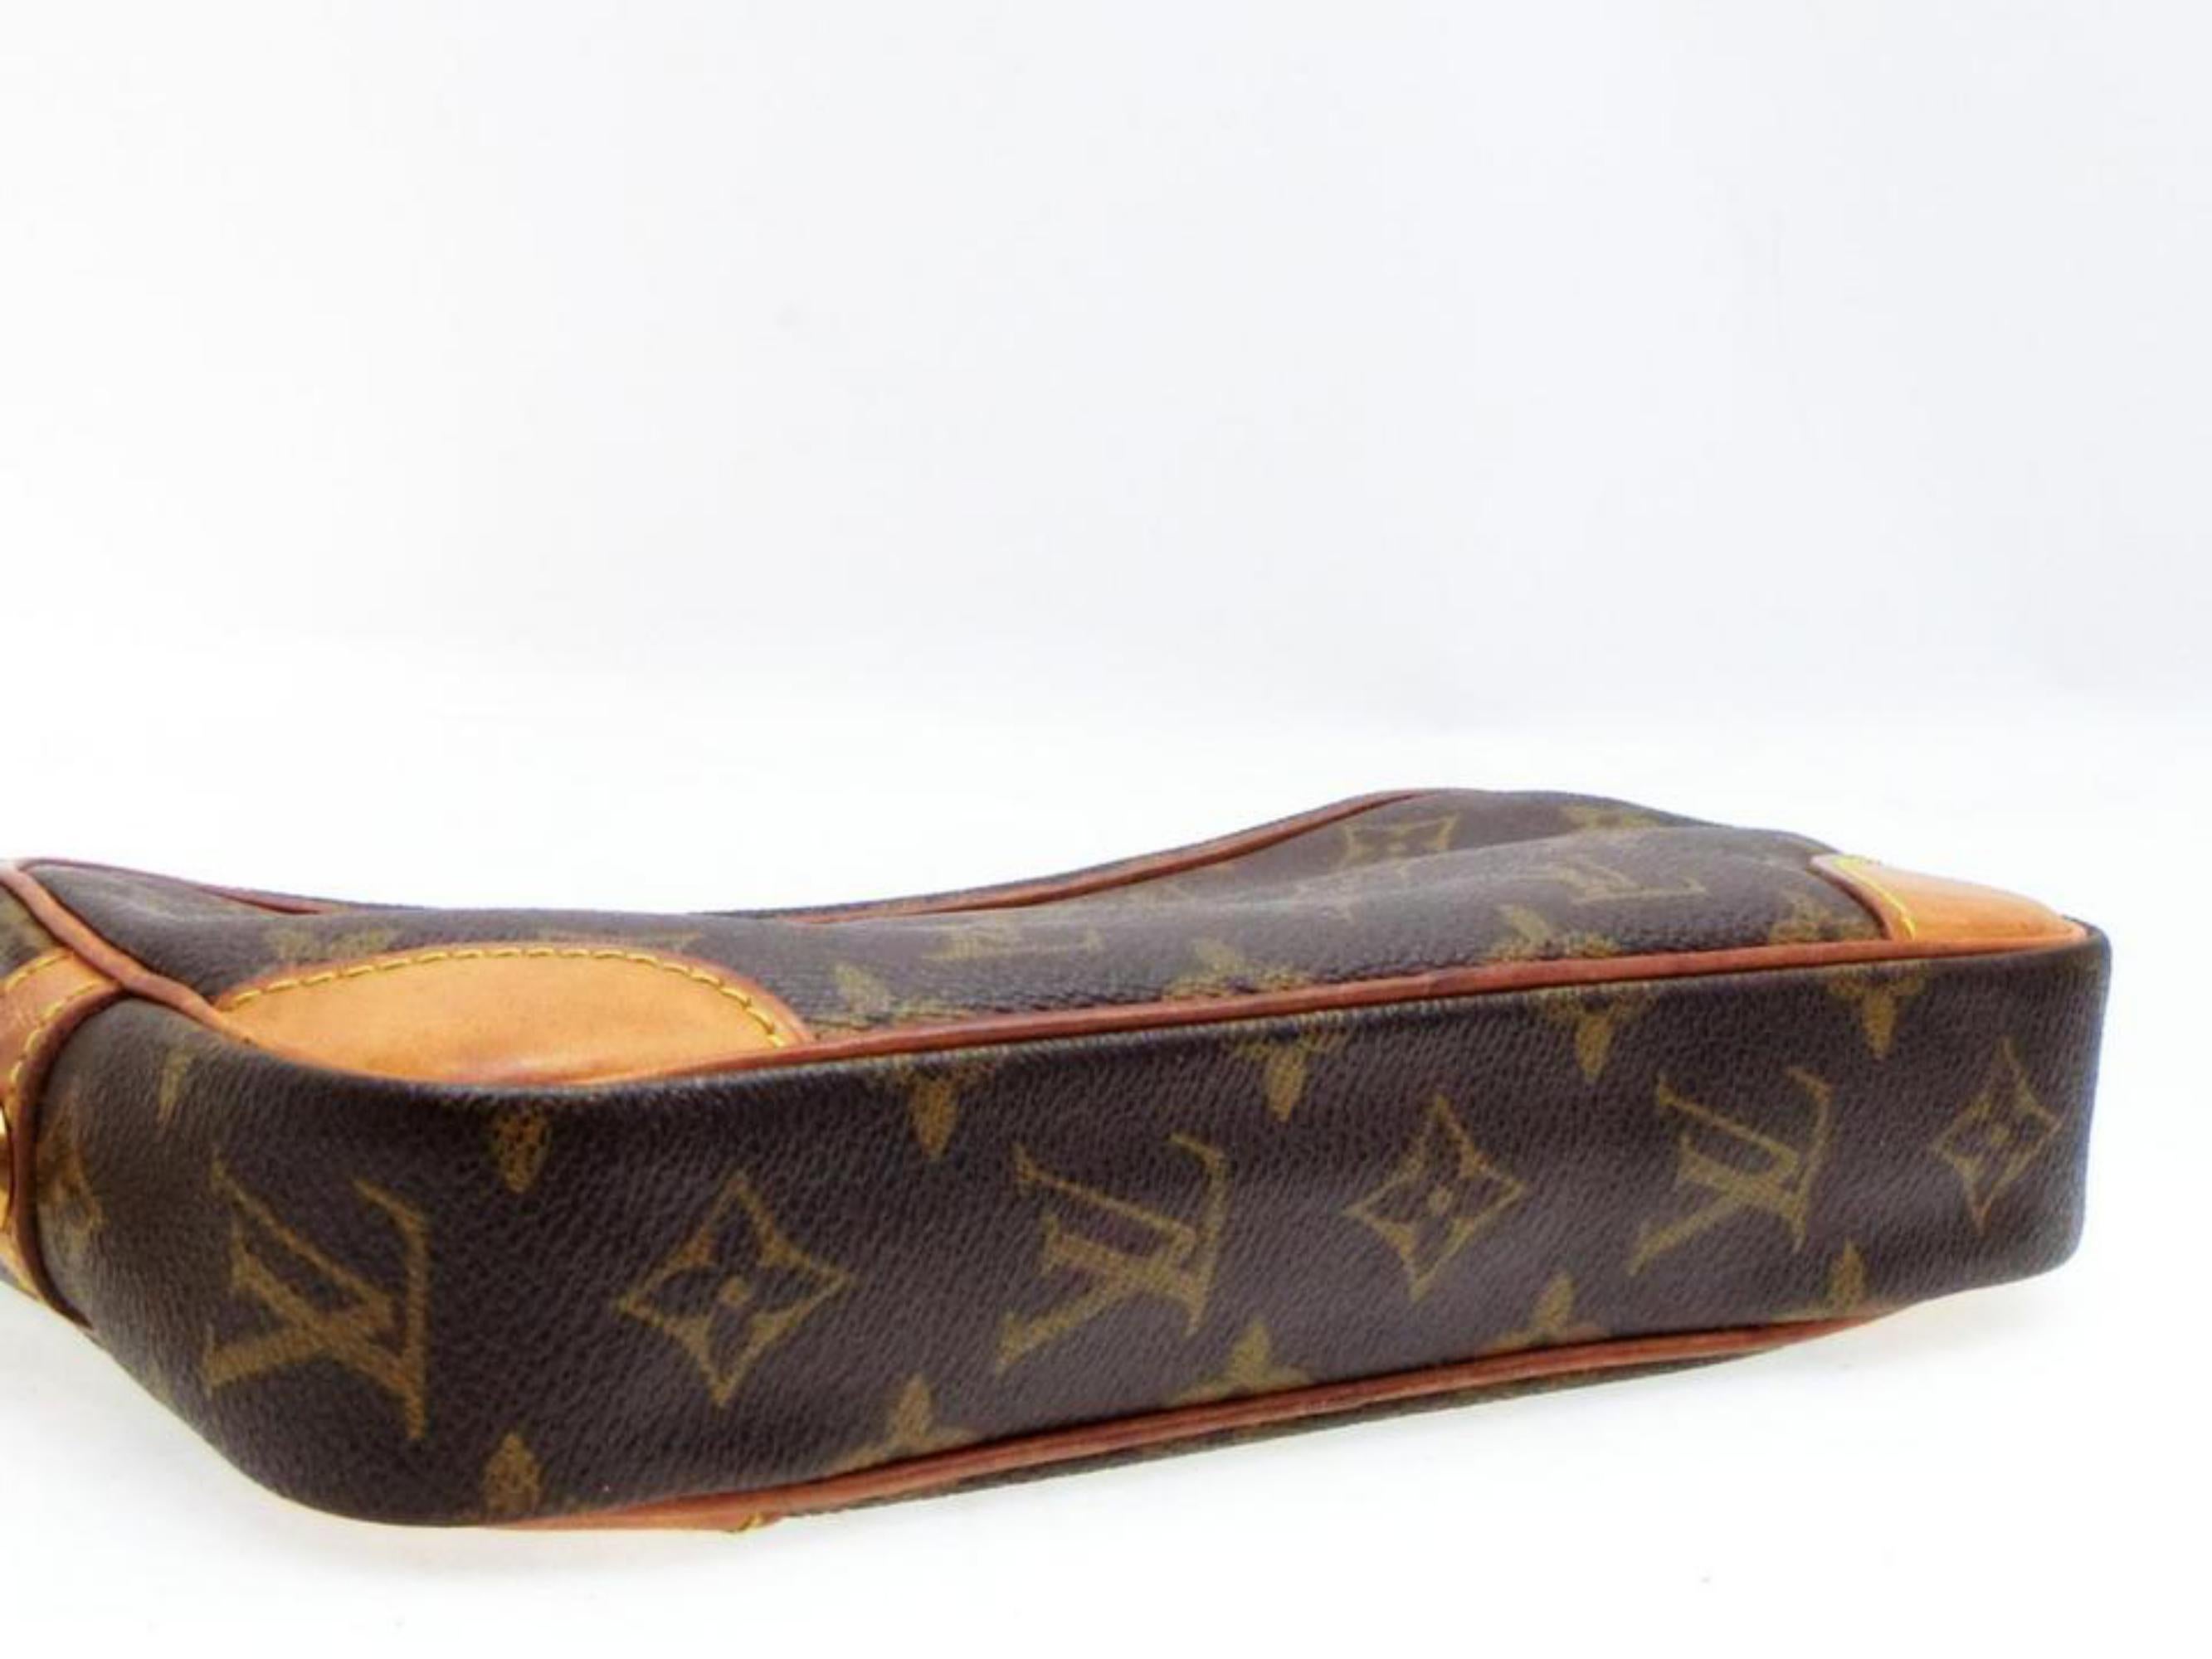 Louis Vuitton Marly Dragonne Marly Pochette Monogram Pm 232726 Brown Clutch For Sale 4